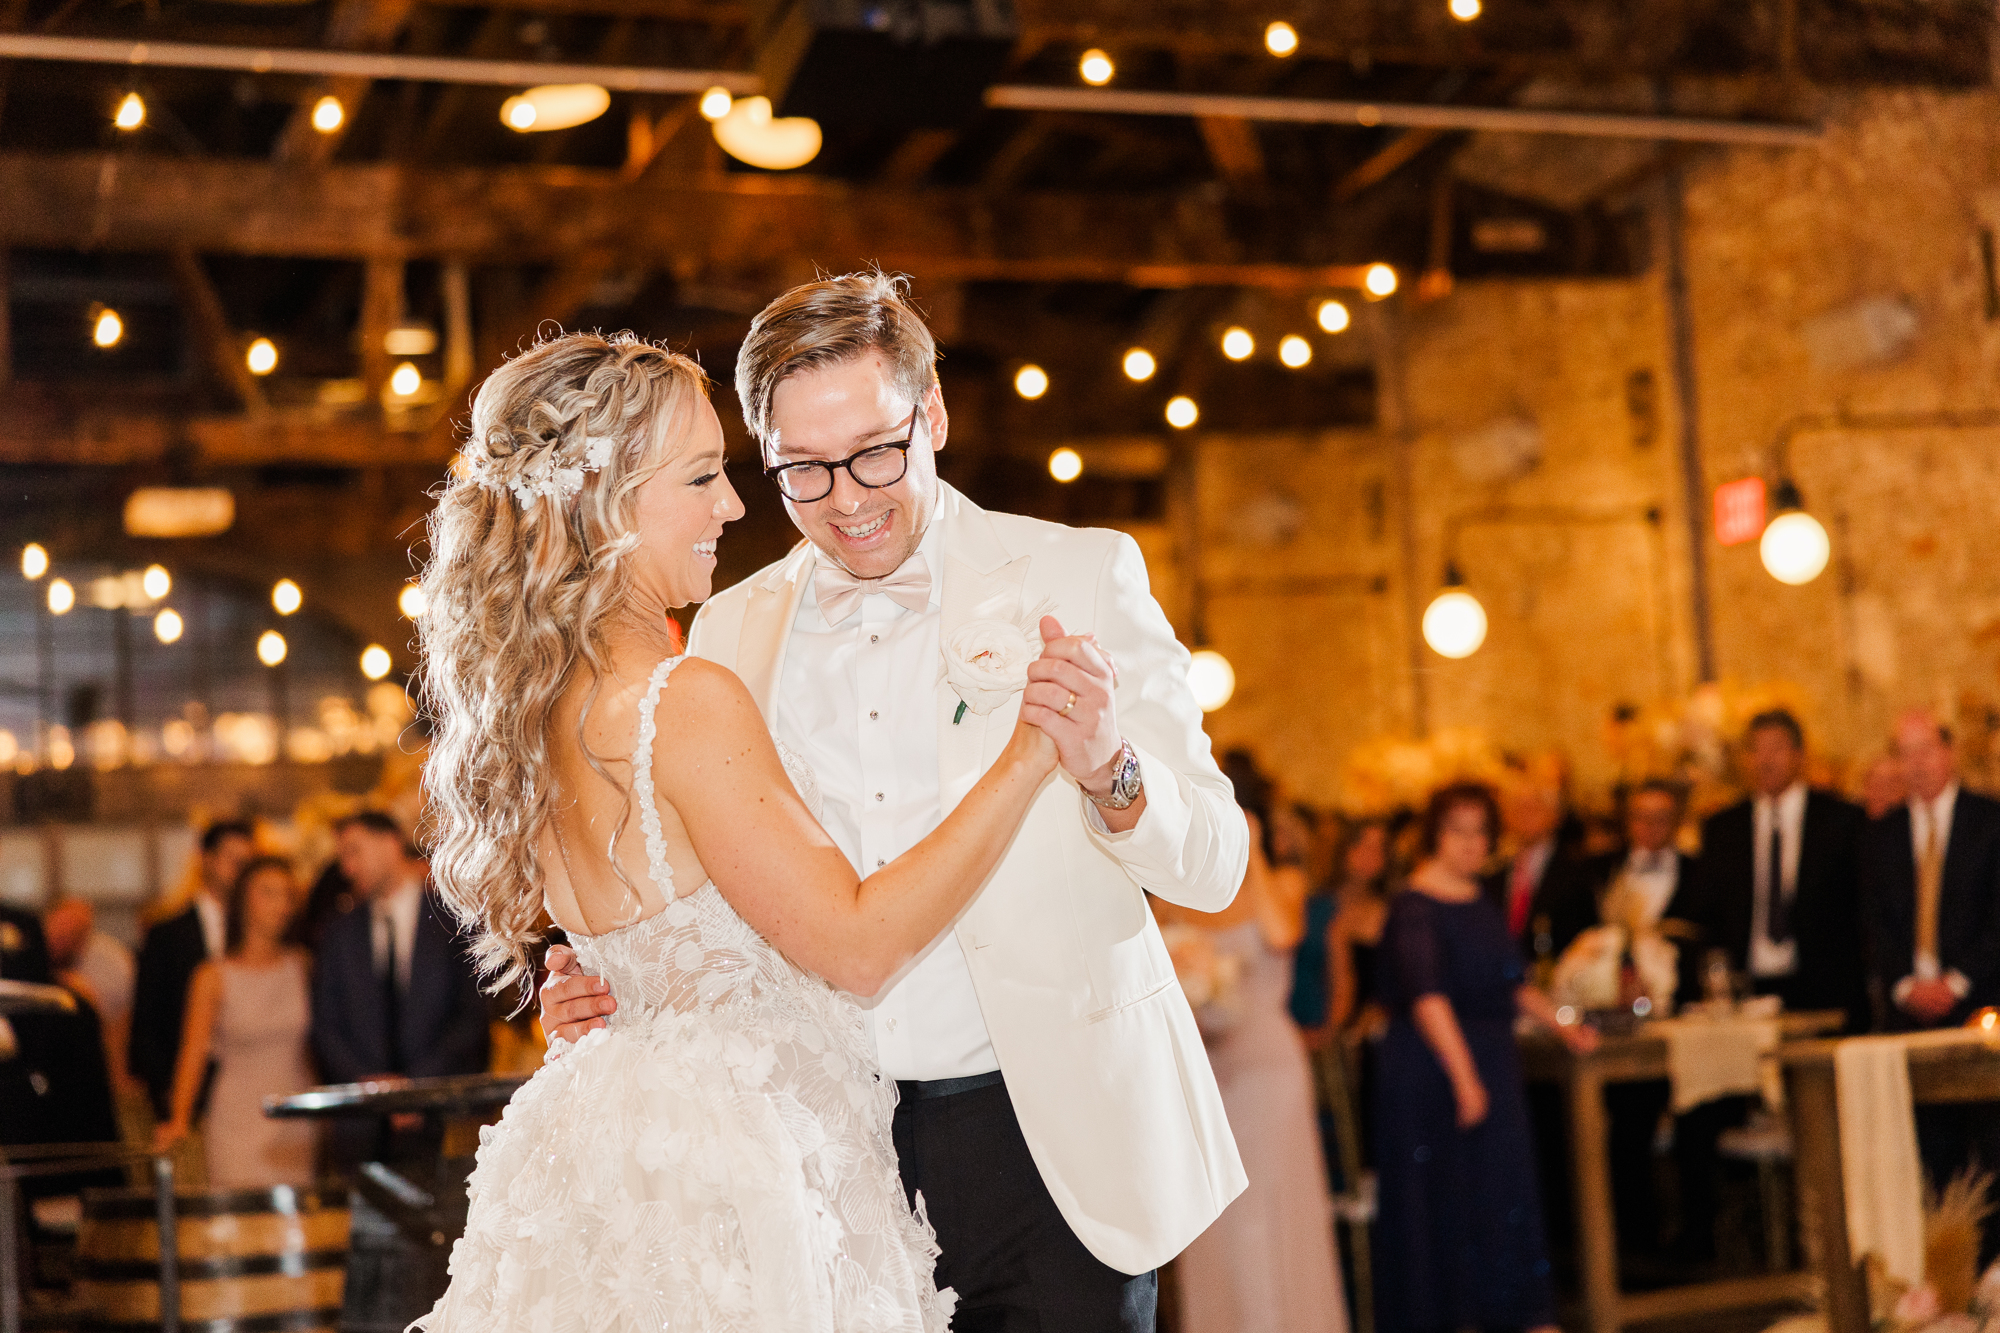 Candid New York Wedding Photos at Old St. Patrick's Cathedral and Houston Hall